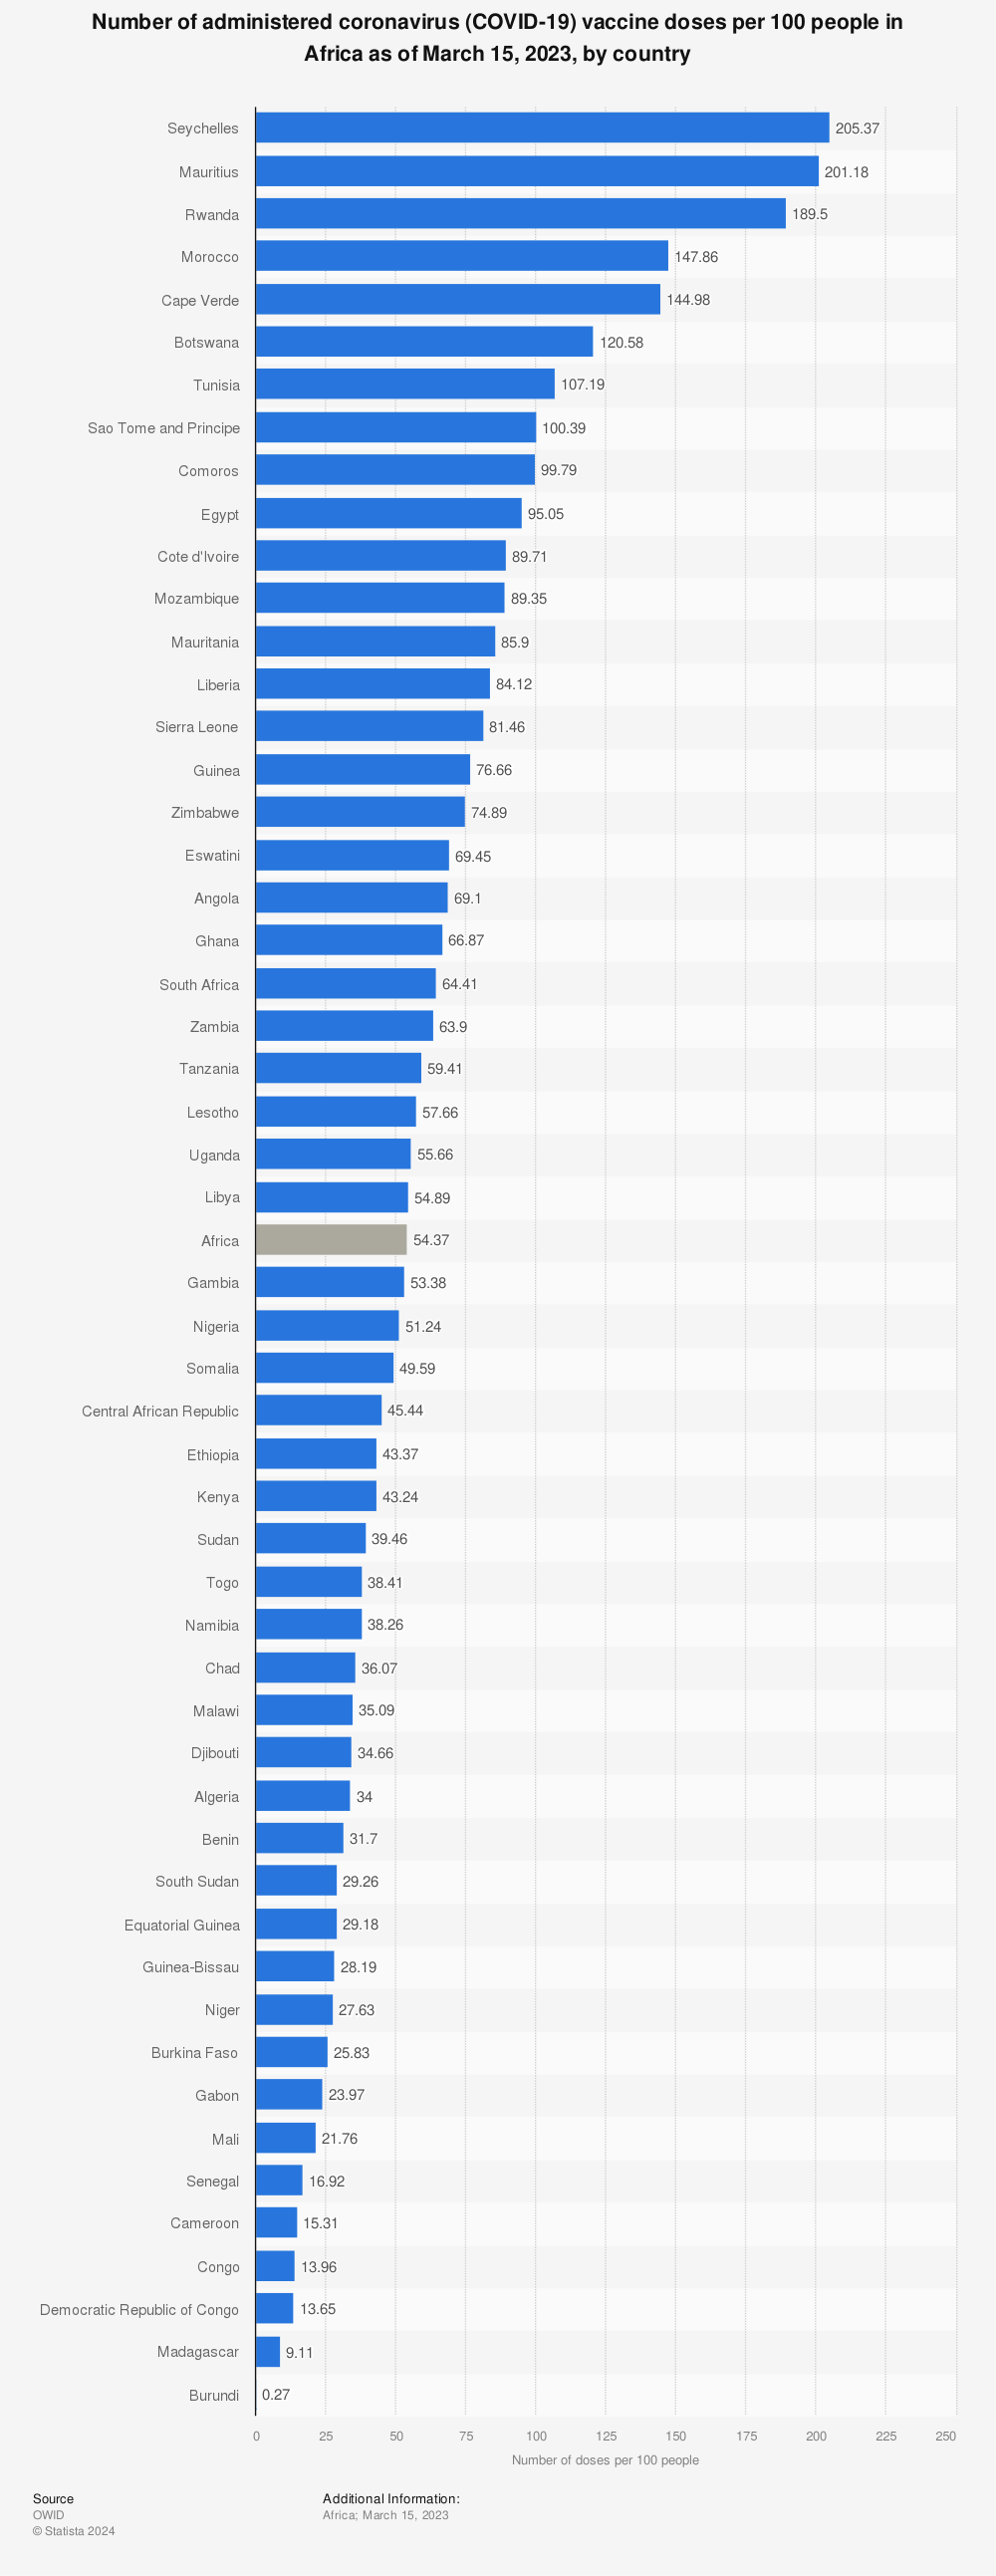 Statistic: Number of administered coronavirus (COVID-19) vaccine doses per 100 people in Africa as of November 3, 2022, by country | Statista